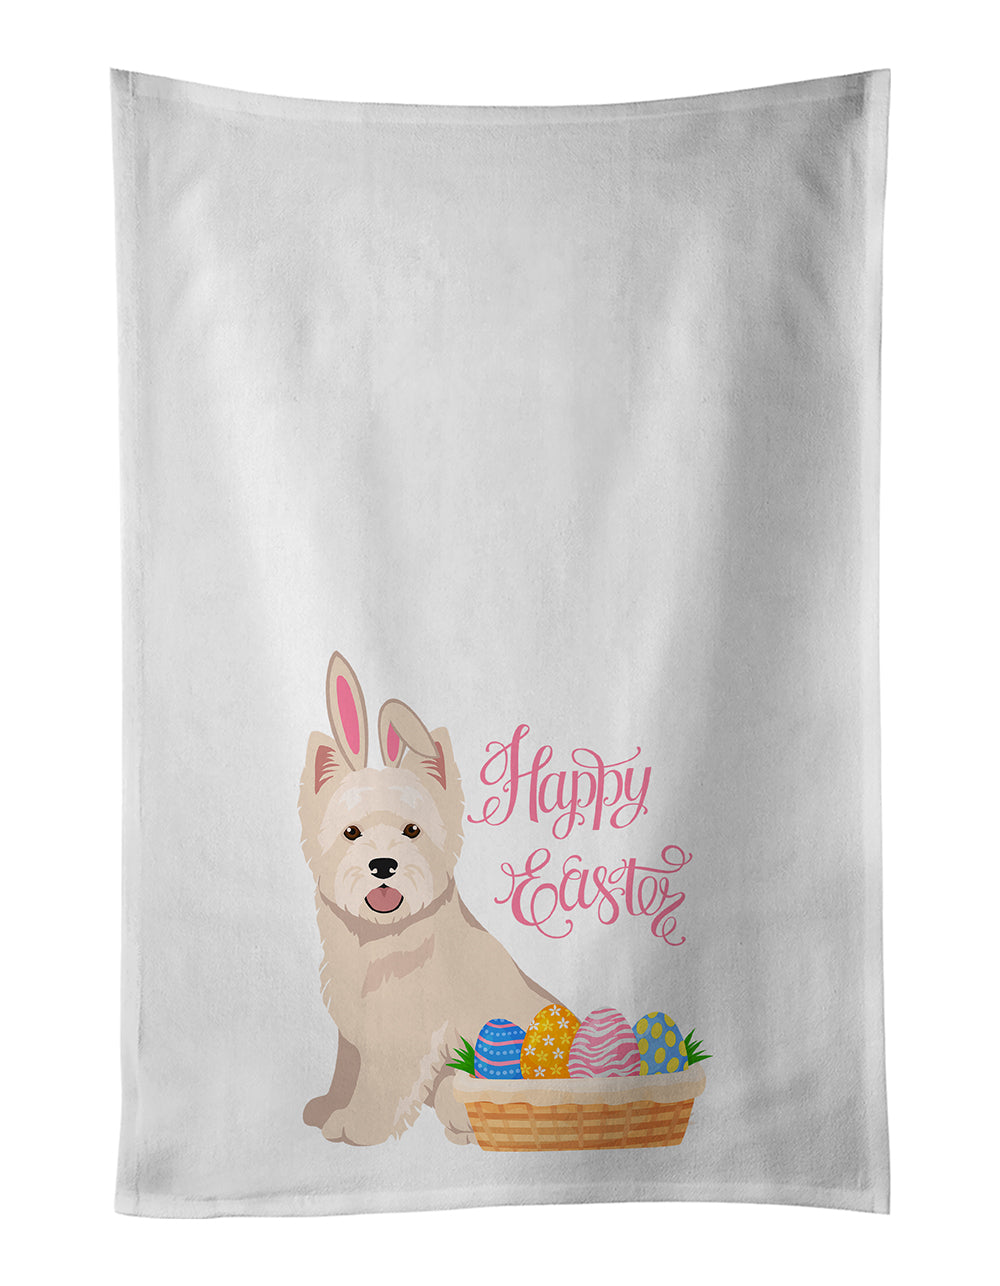 Buy this Westie West Highland White Terrier Easter White Kitchen Towel Set of 2 Dish Towels